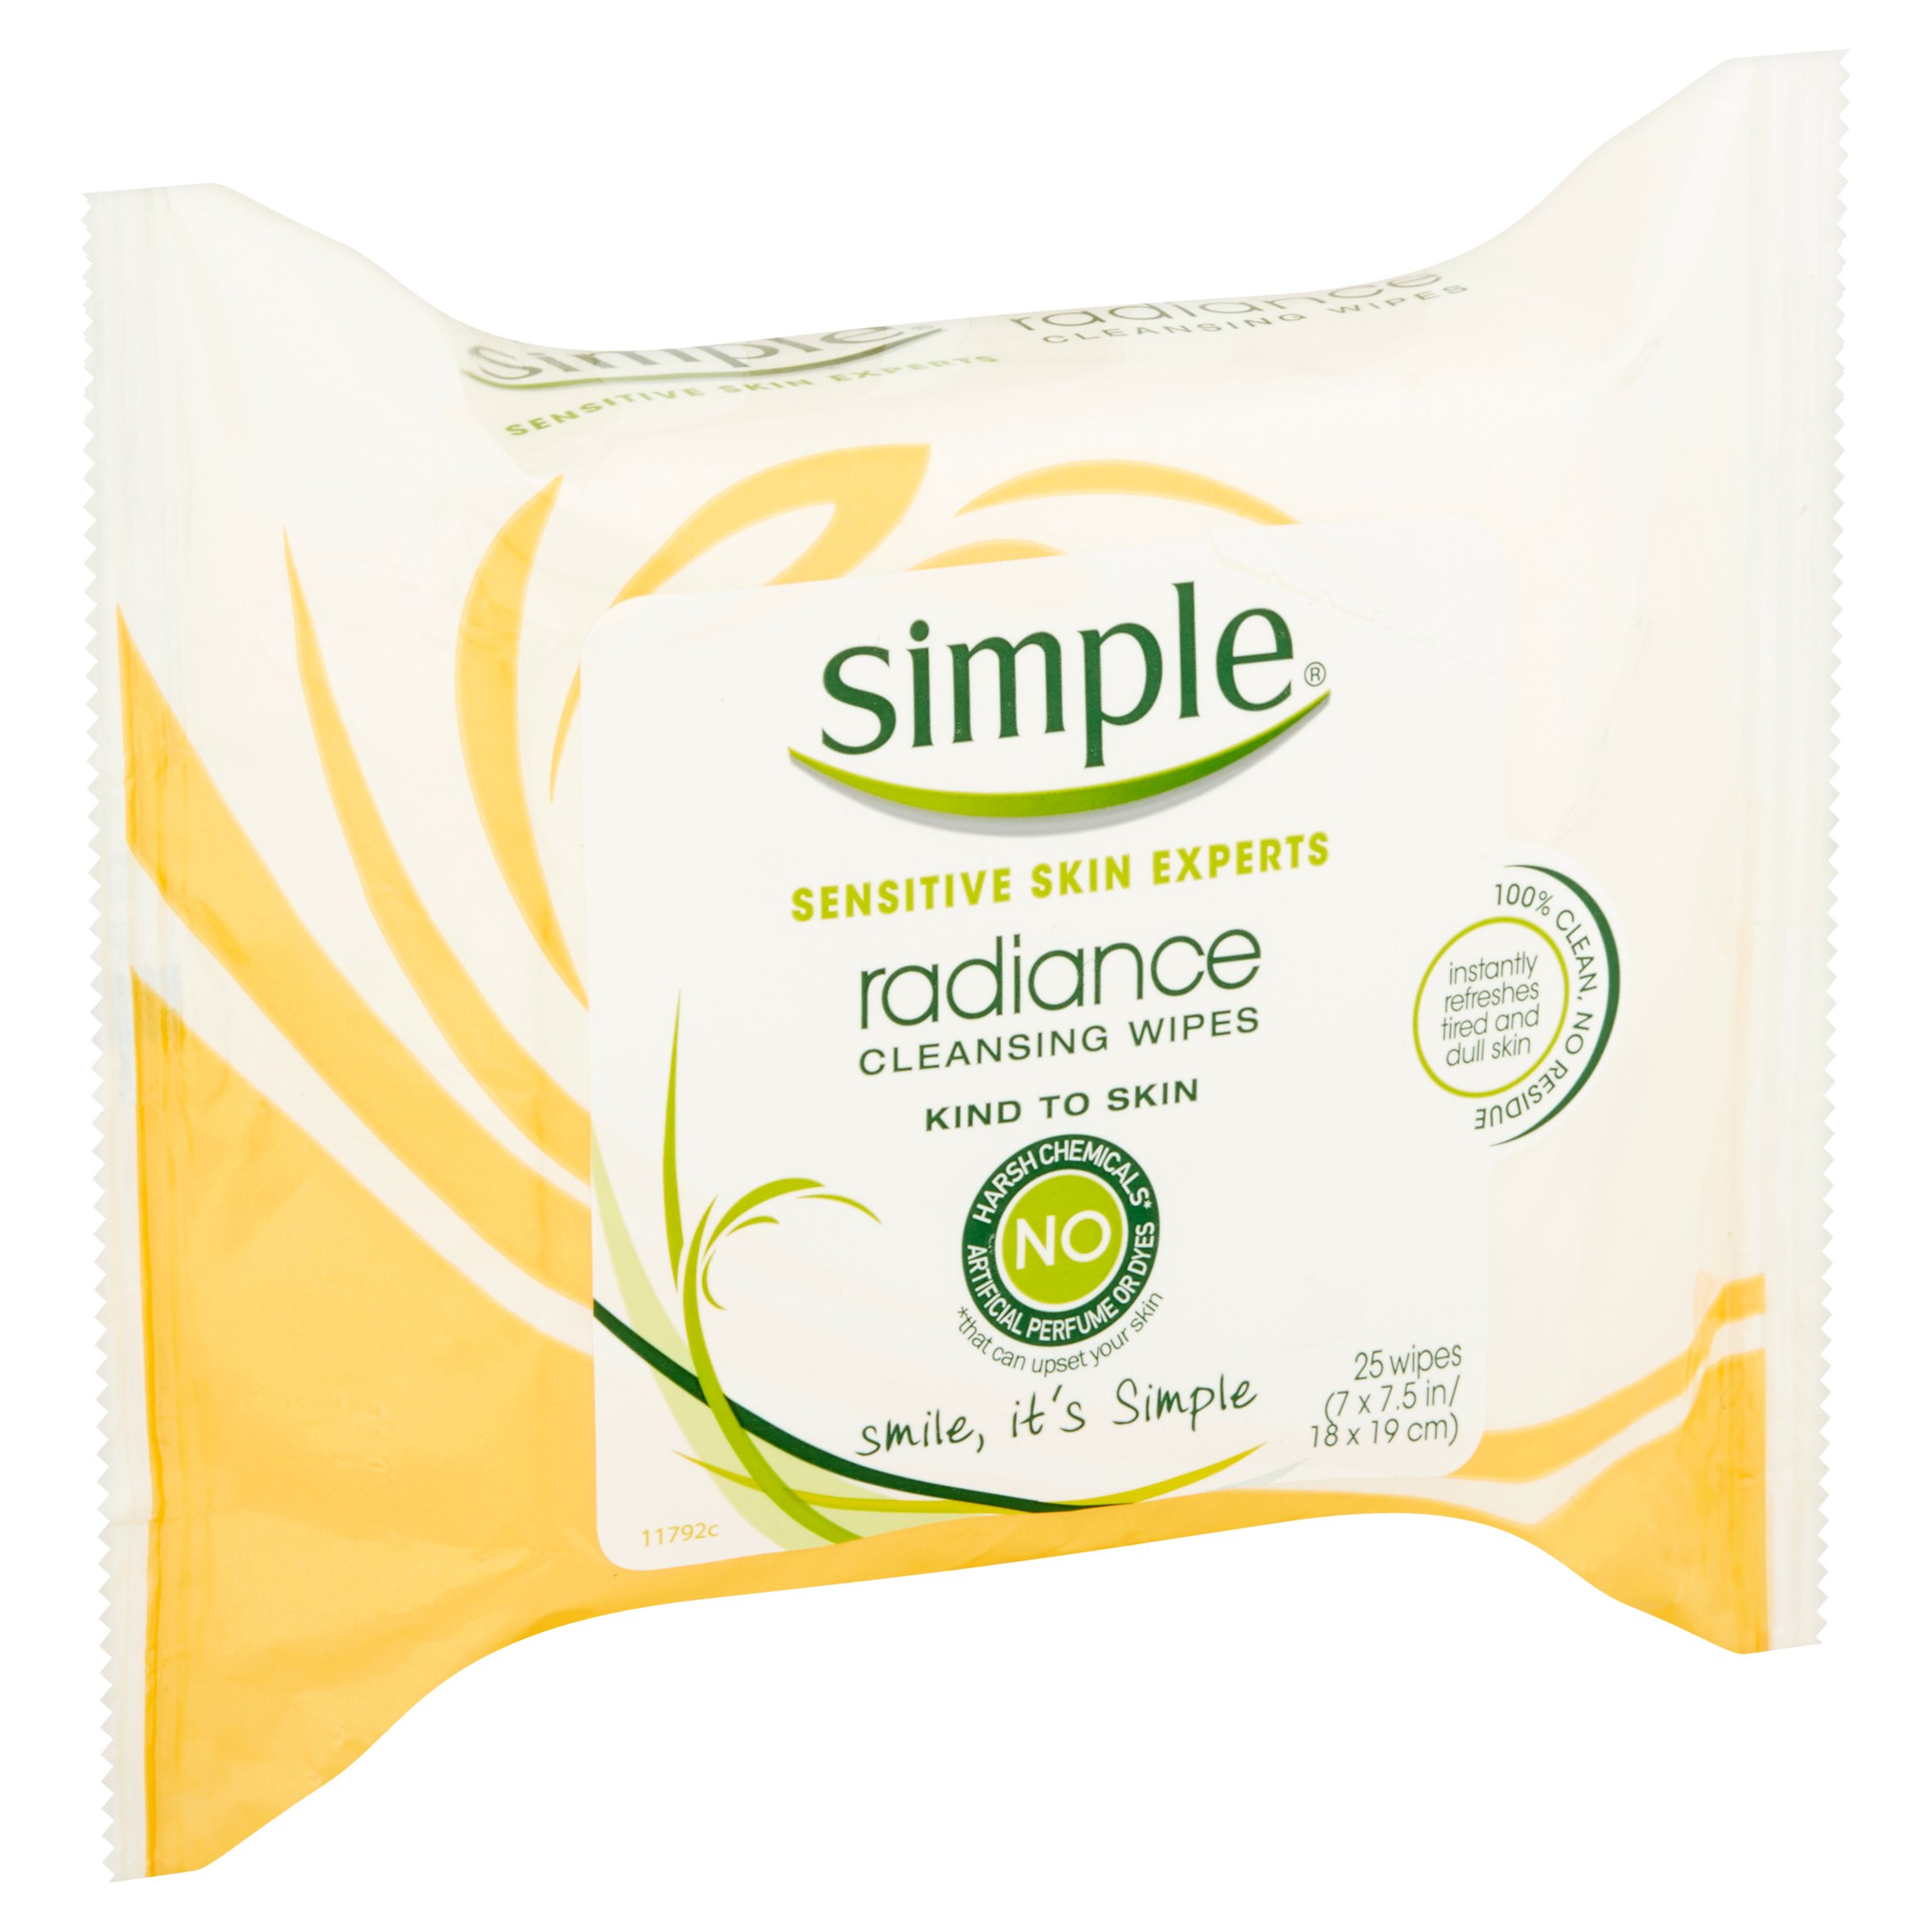 Simple Kind to Skin Facial Wipes Radiance 25 ct - image 3 of 6